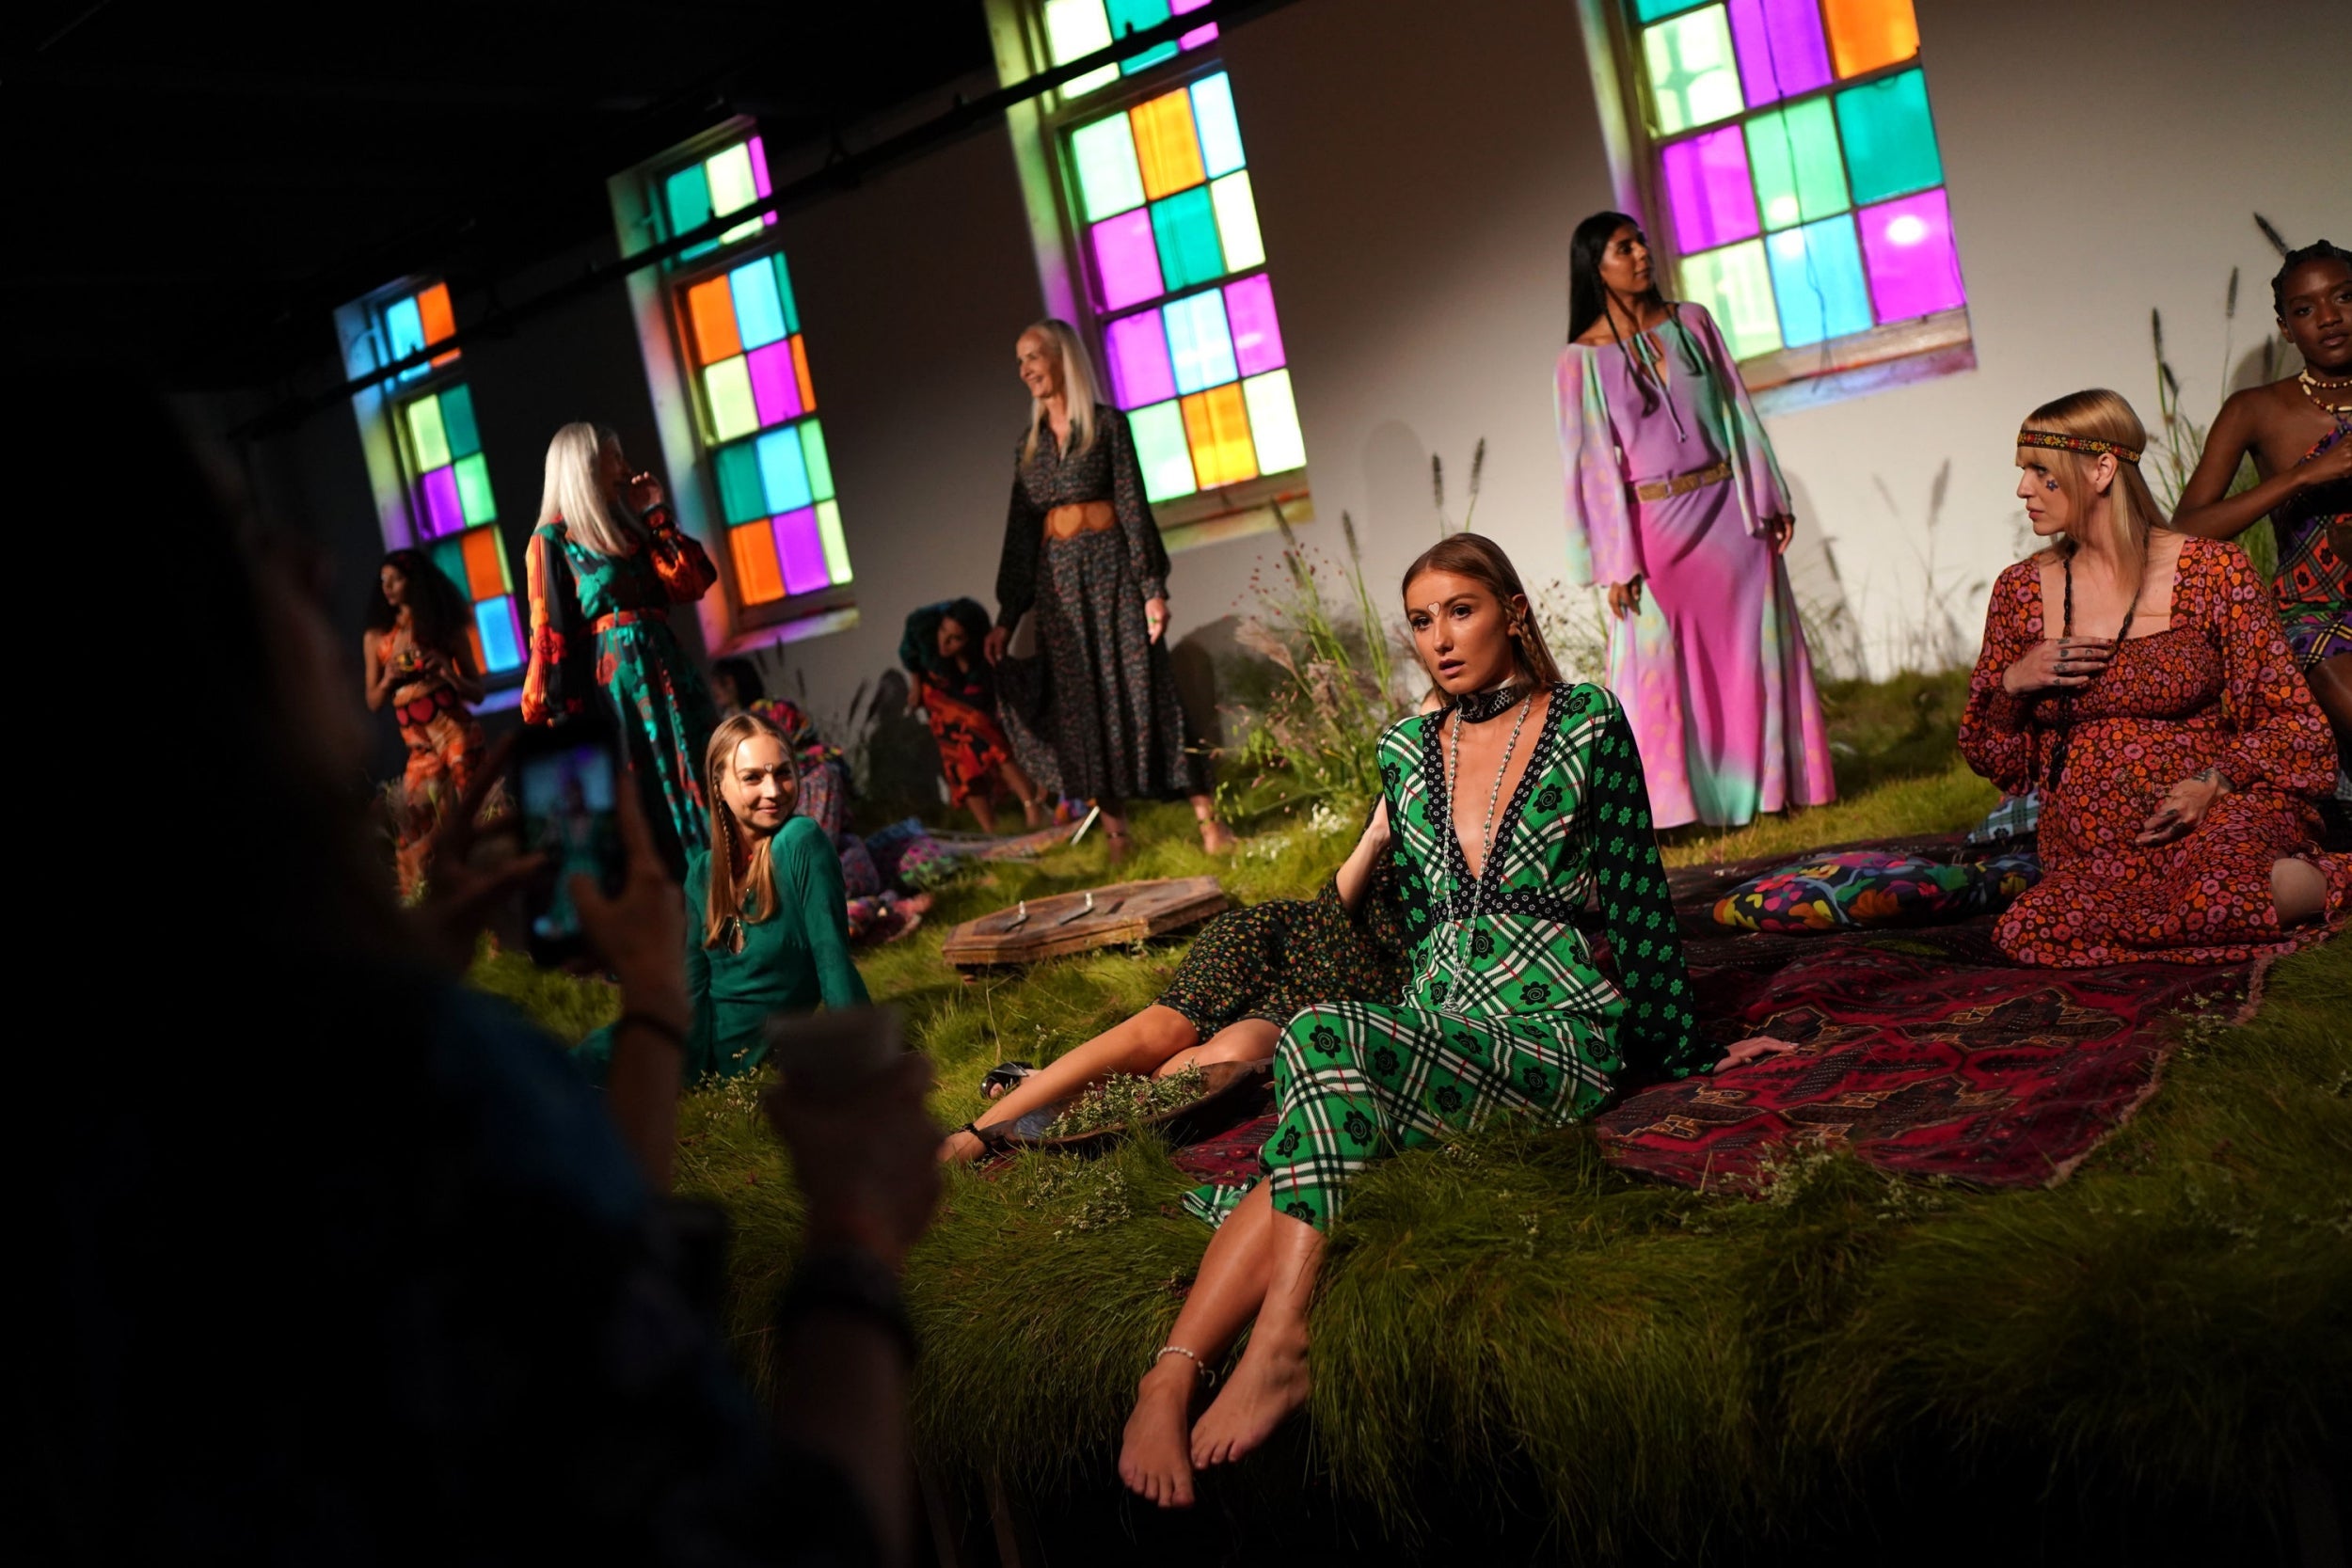 Models posed on a grass stage at the presentation of Rixo spring/summer 2020